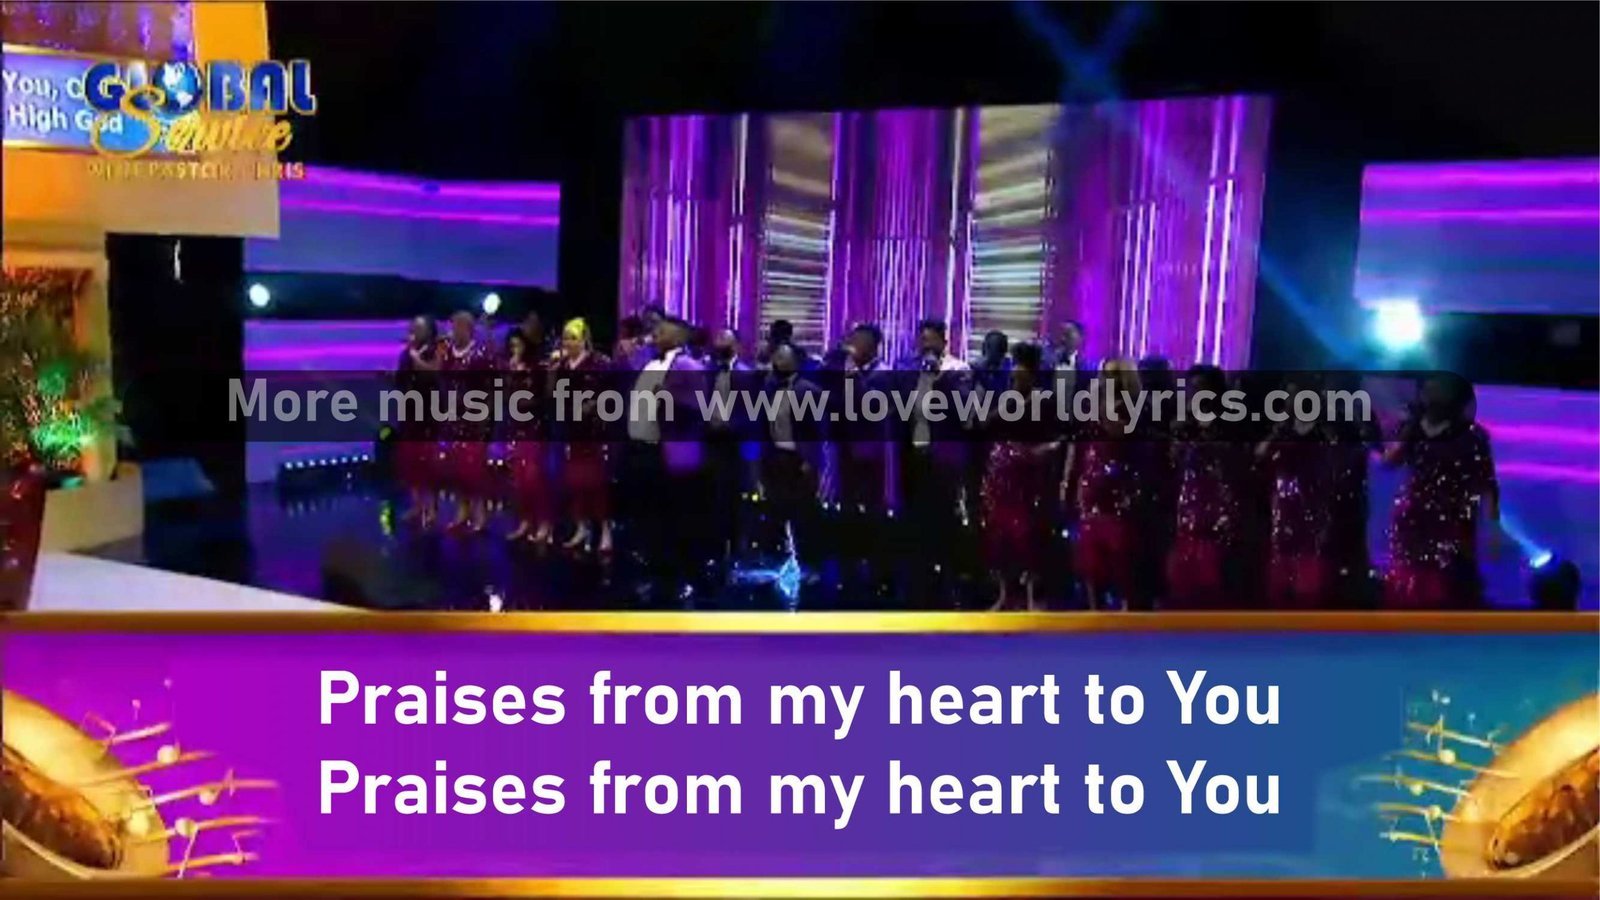 Praises from my heart to You